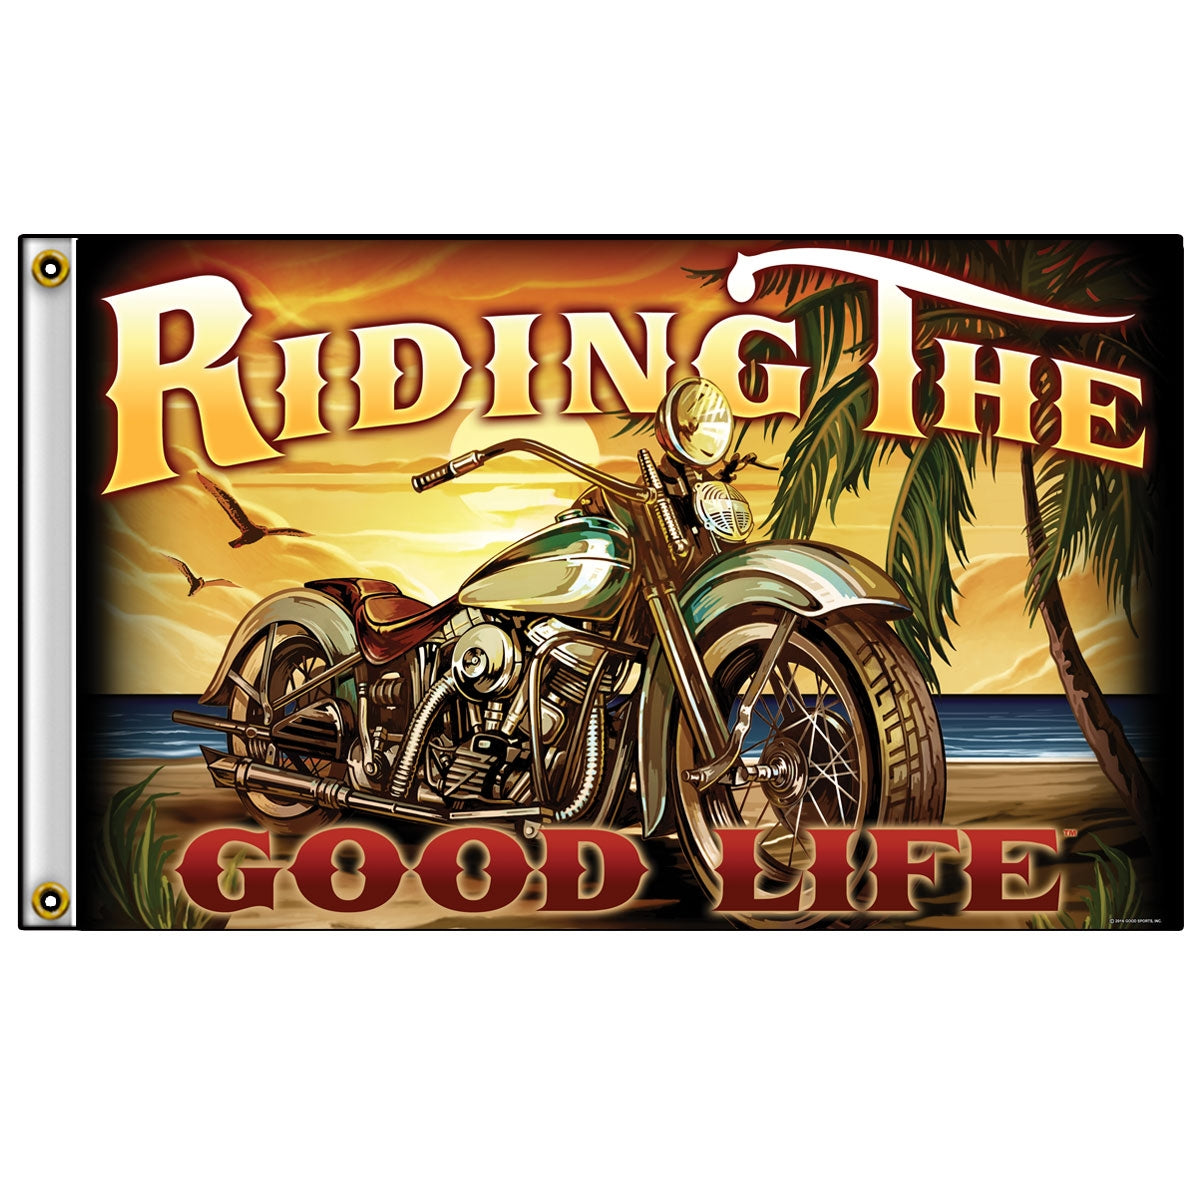 Hot Leathers FGA1070 Riding the Good Life Flag 3 Foot x 5 Foot